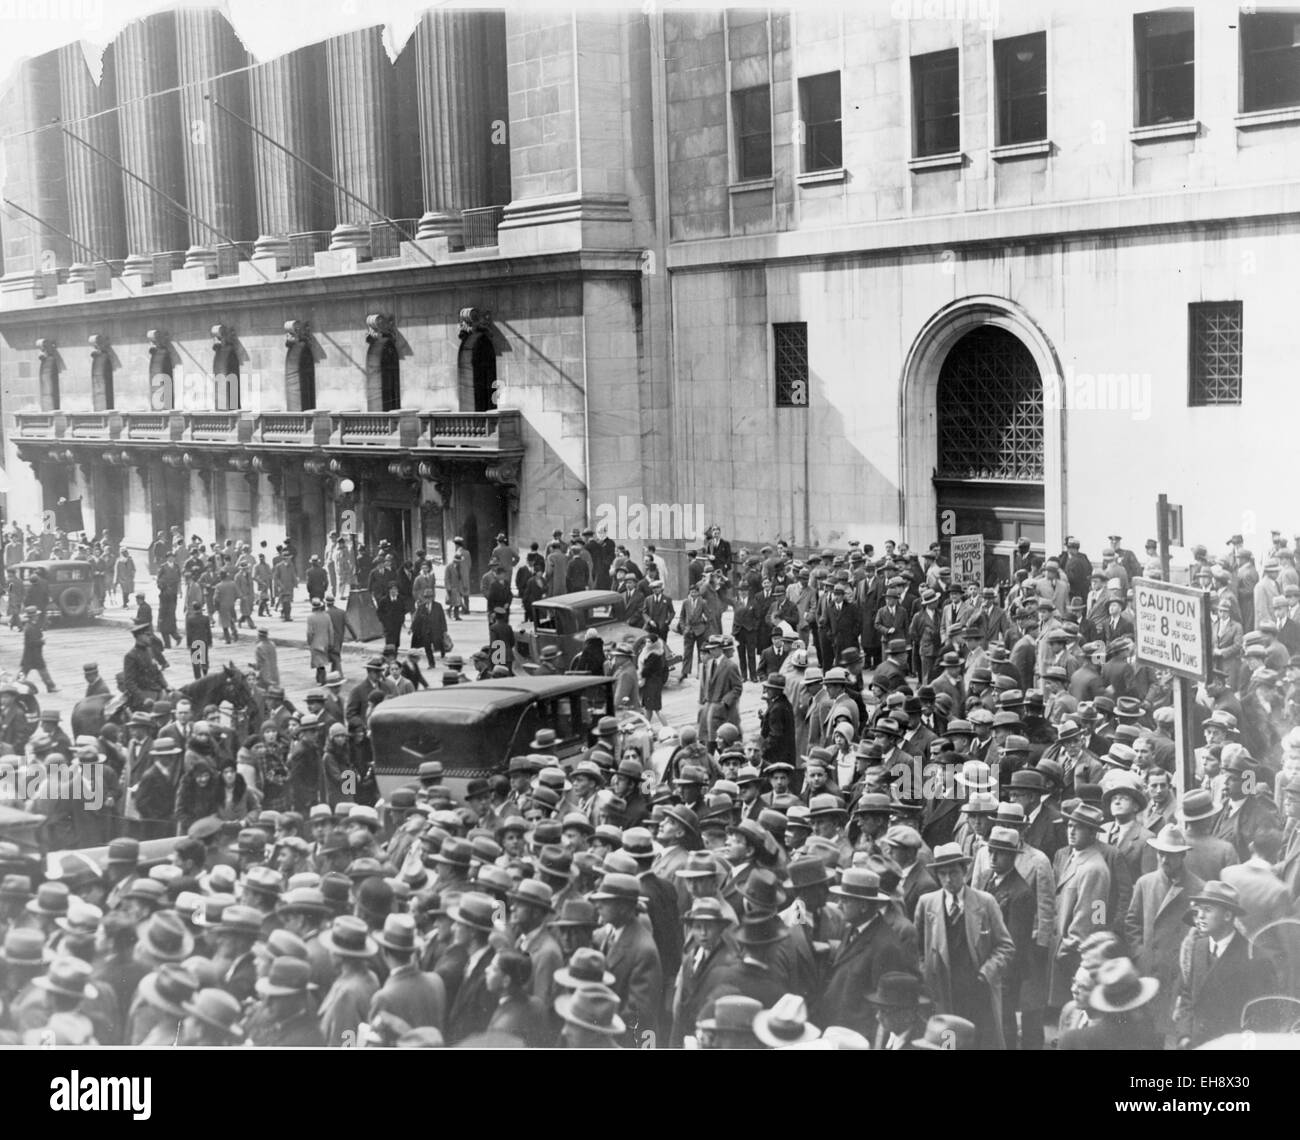 The New York Stock Exchange at Broad and Wall Streets in New York in 1929 following the crash of the market. (Library of Congress) Stock Photo